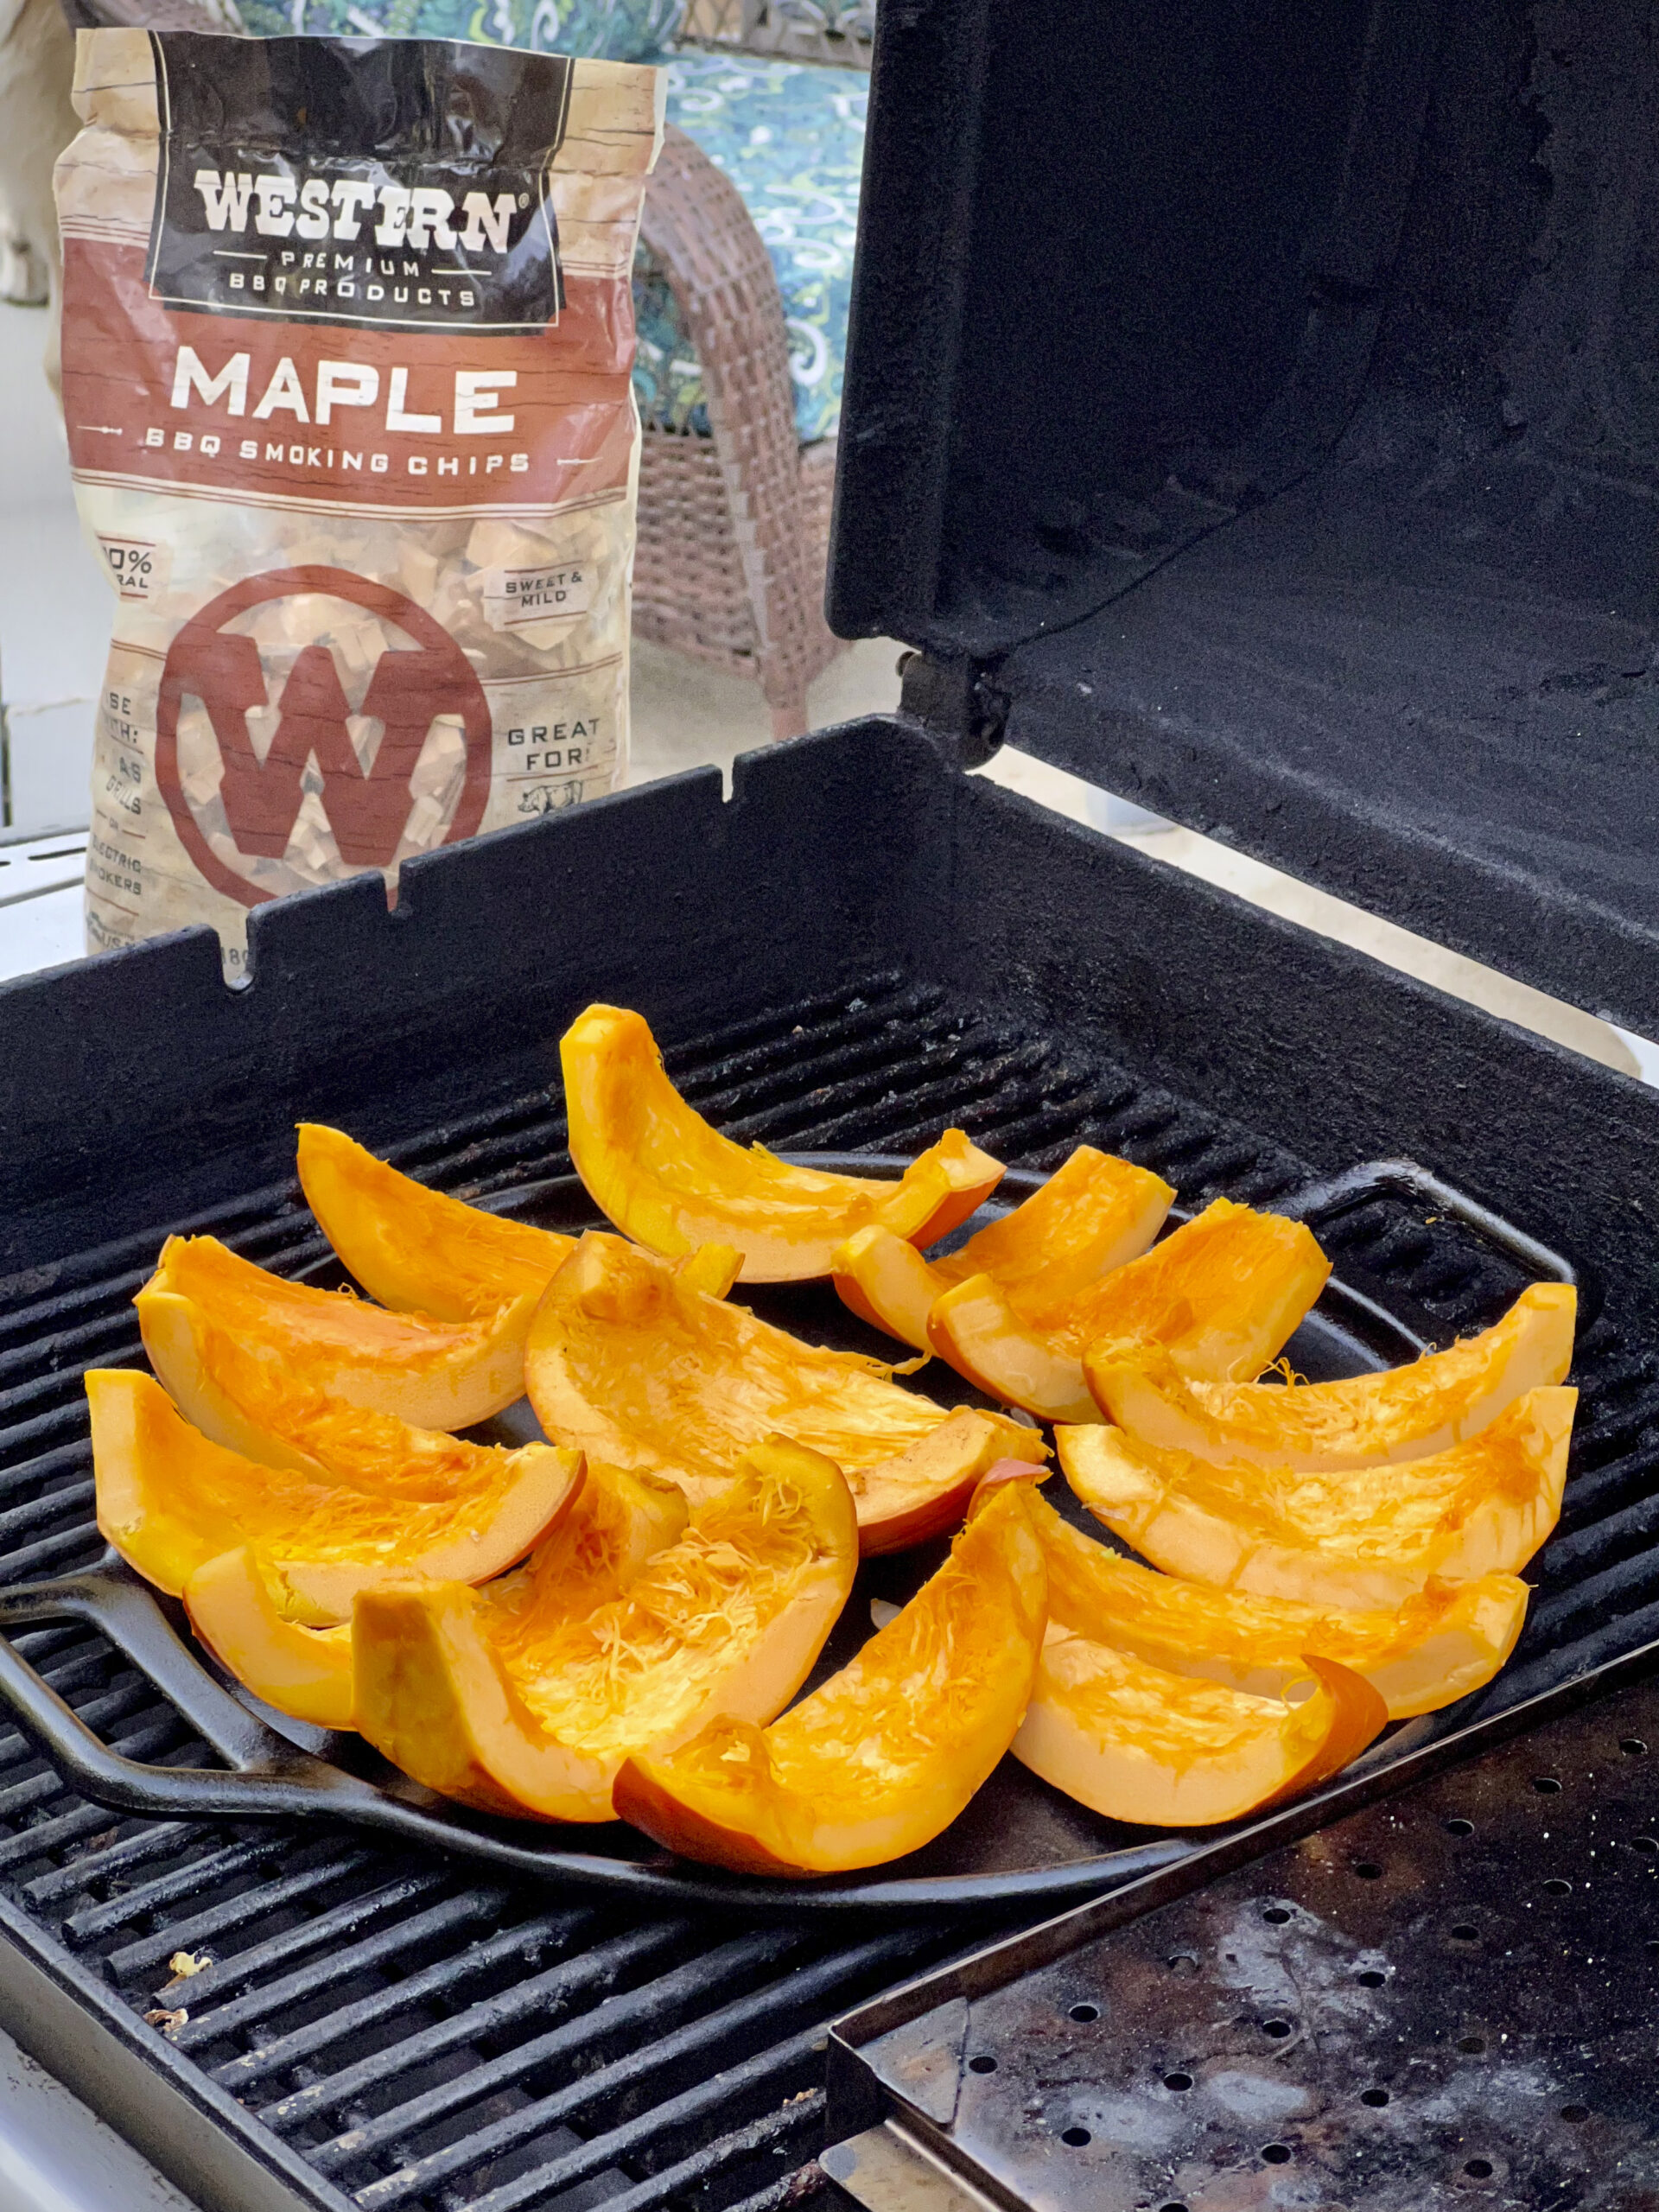 Slices of pumpkin are on the grill being smoked by maple smoking chips.